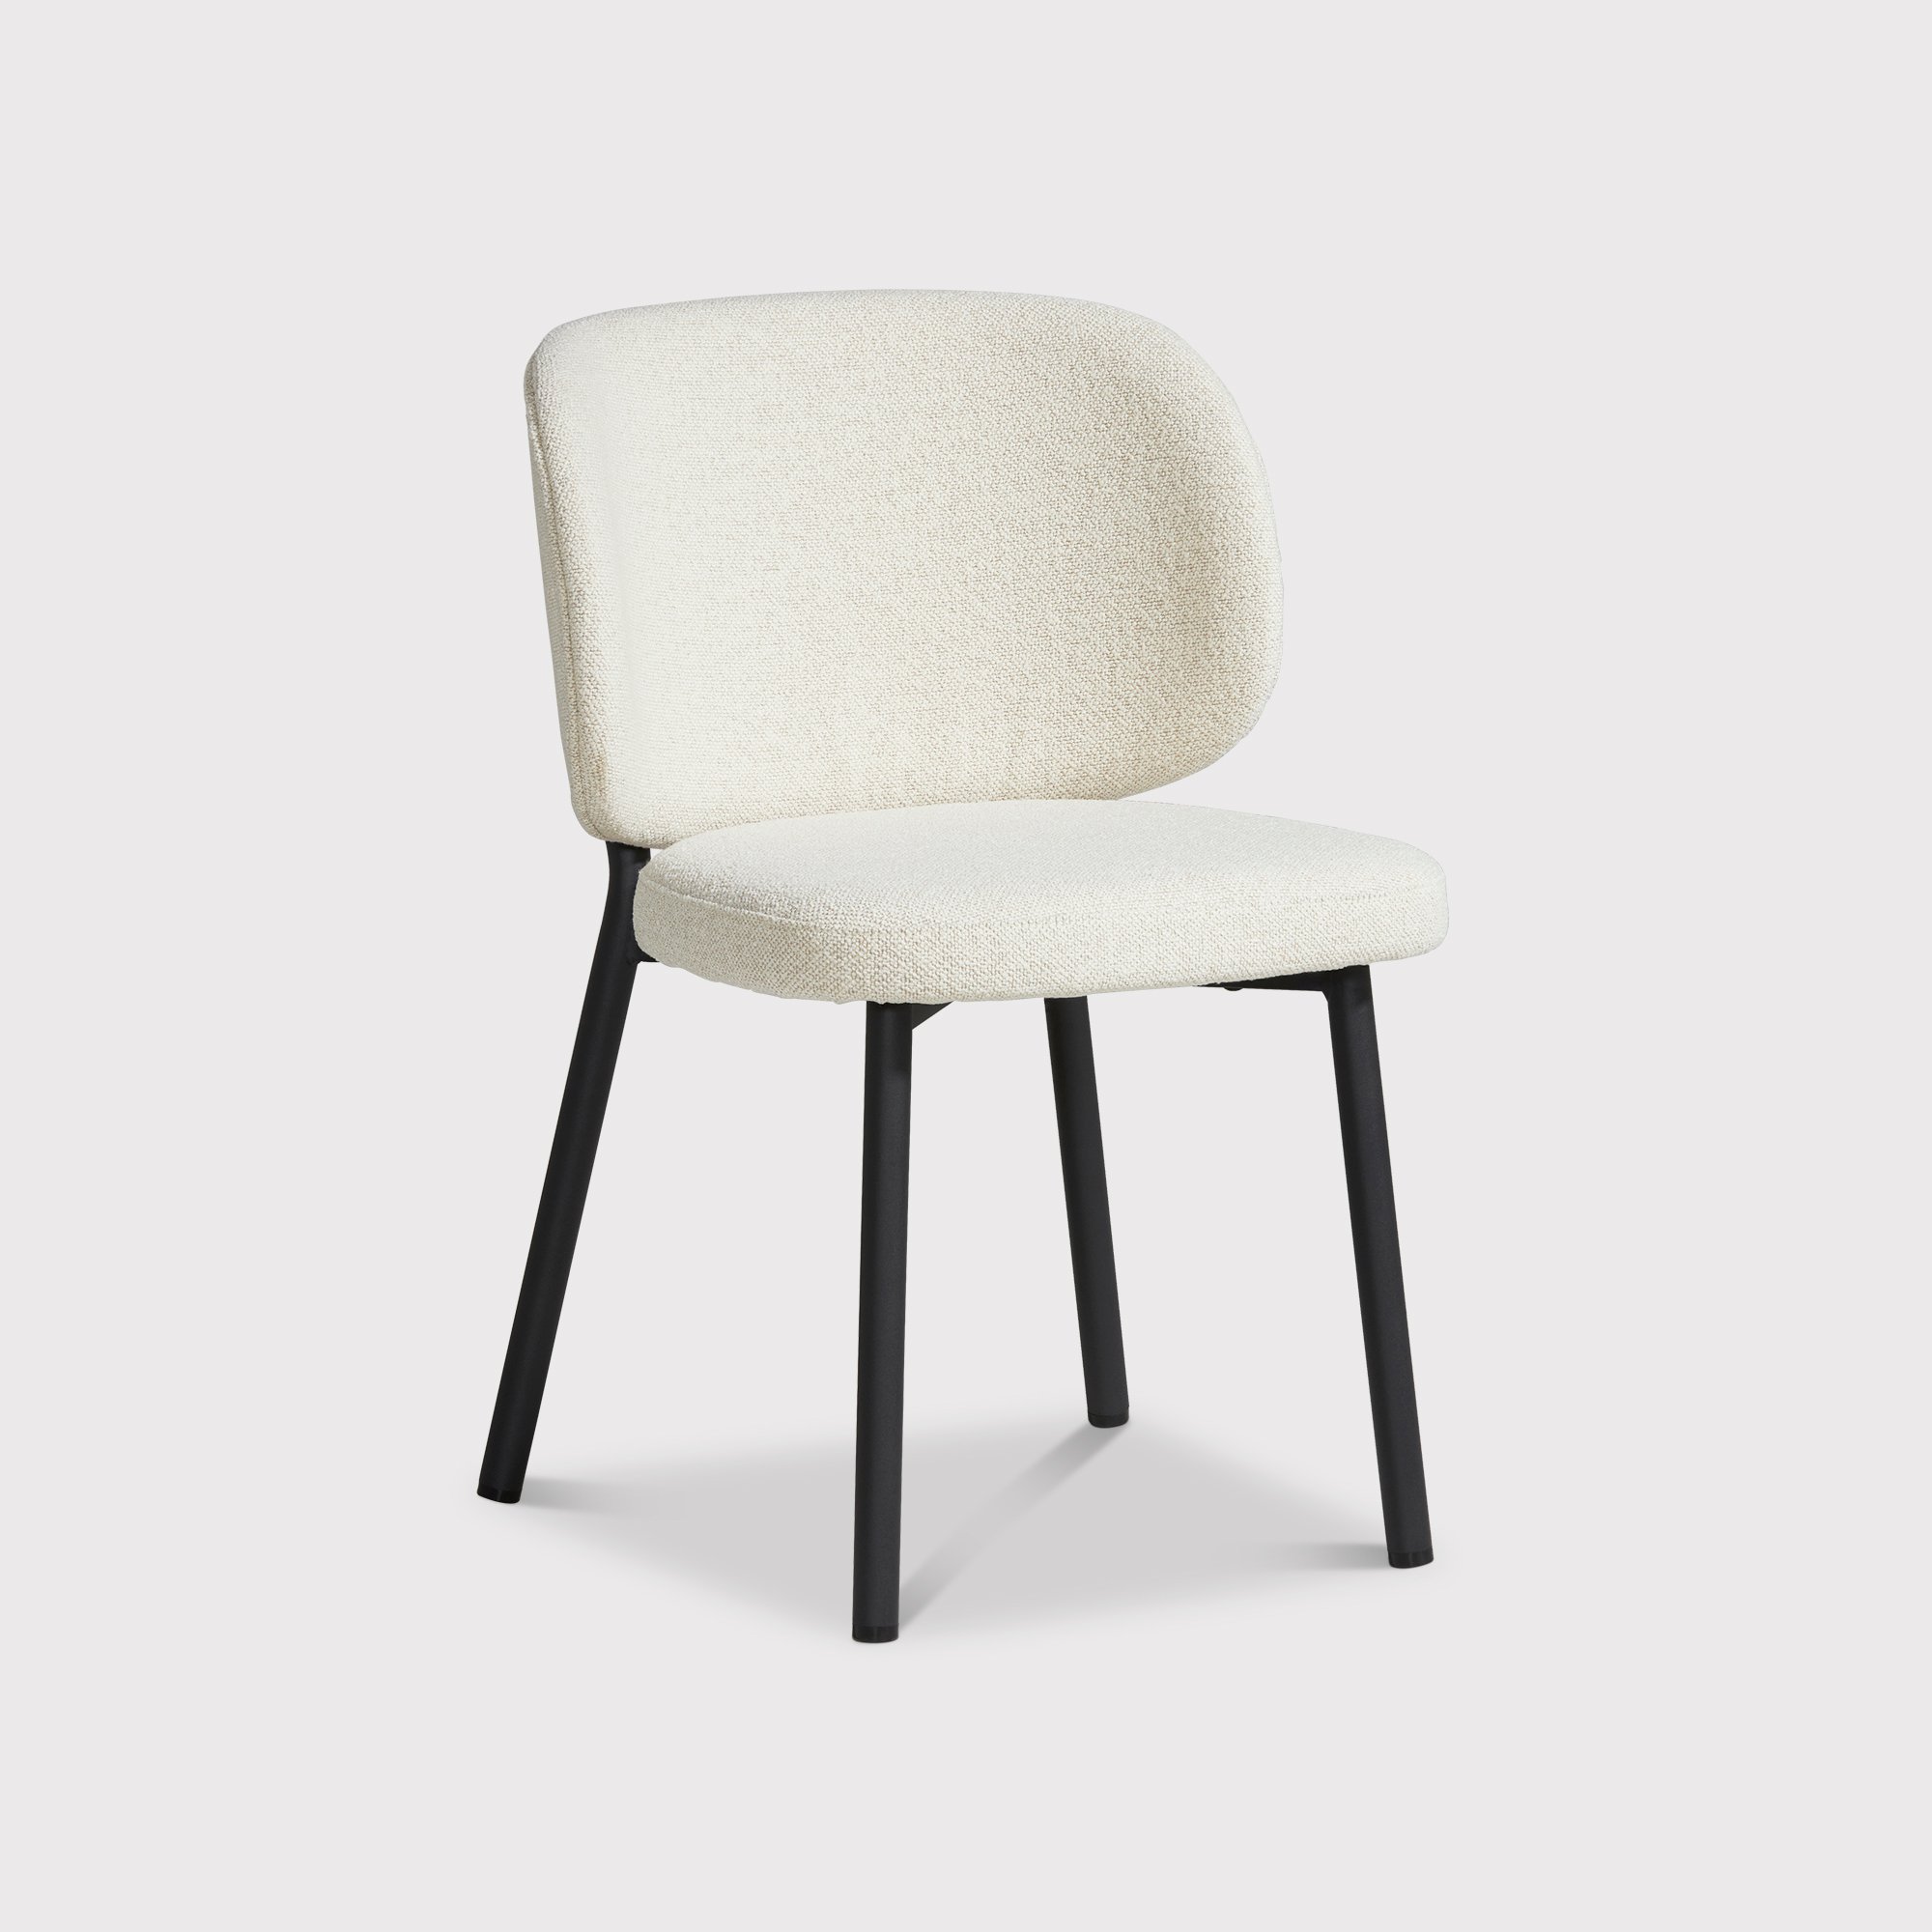 Elodie Dining Chair, Neutral | Barker & Stonehouse